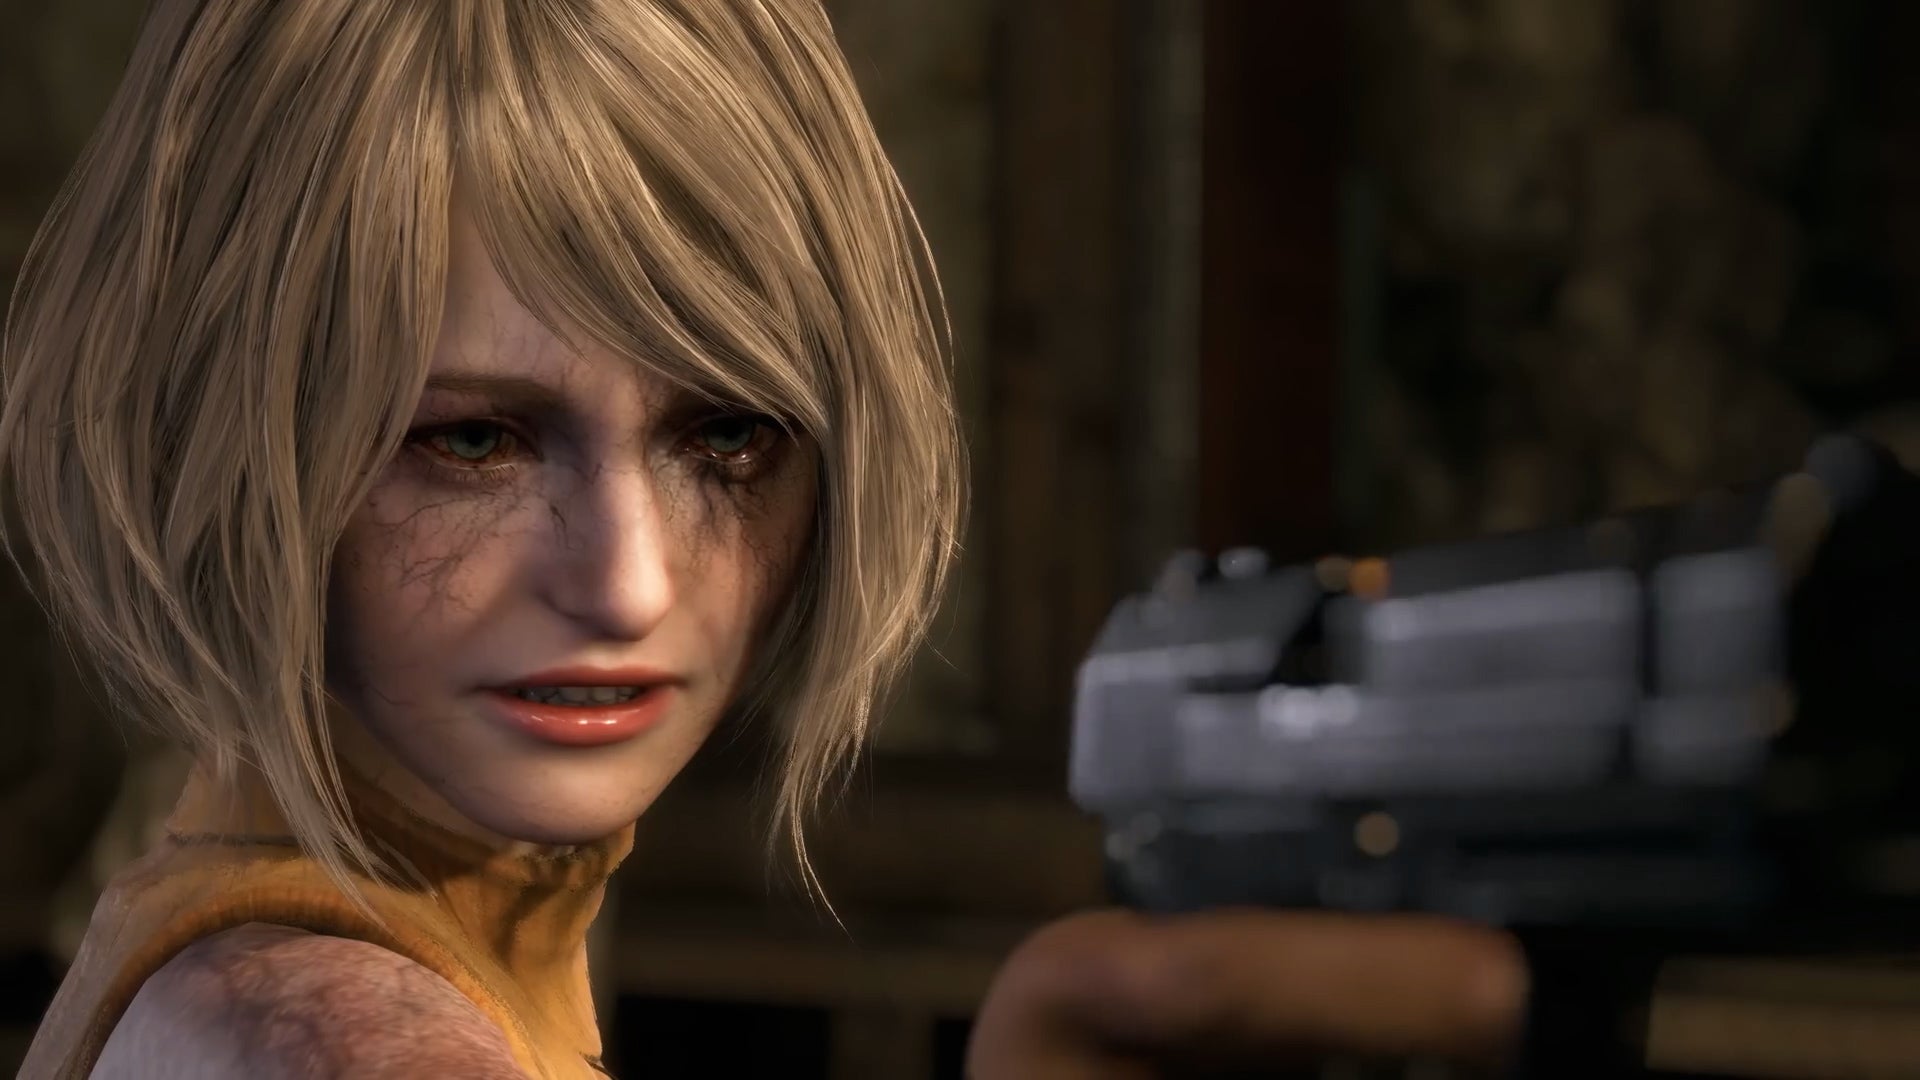 Ashley, covered in horrific veins as a result of her parasitic infection, holds a gun in the Resident Evil 4 remake